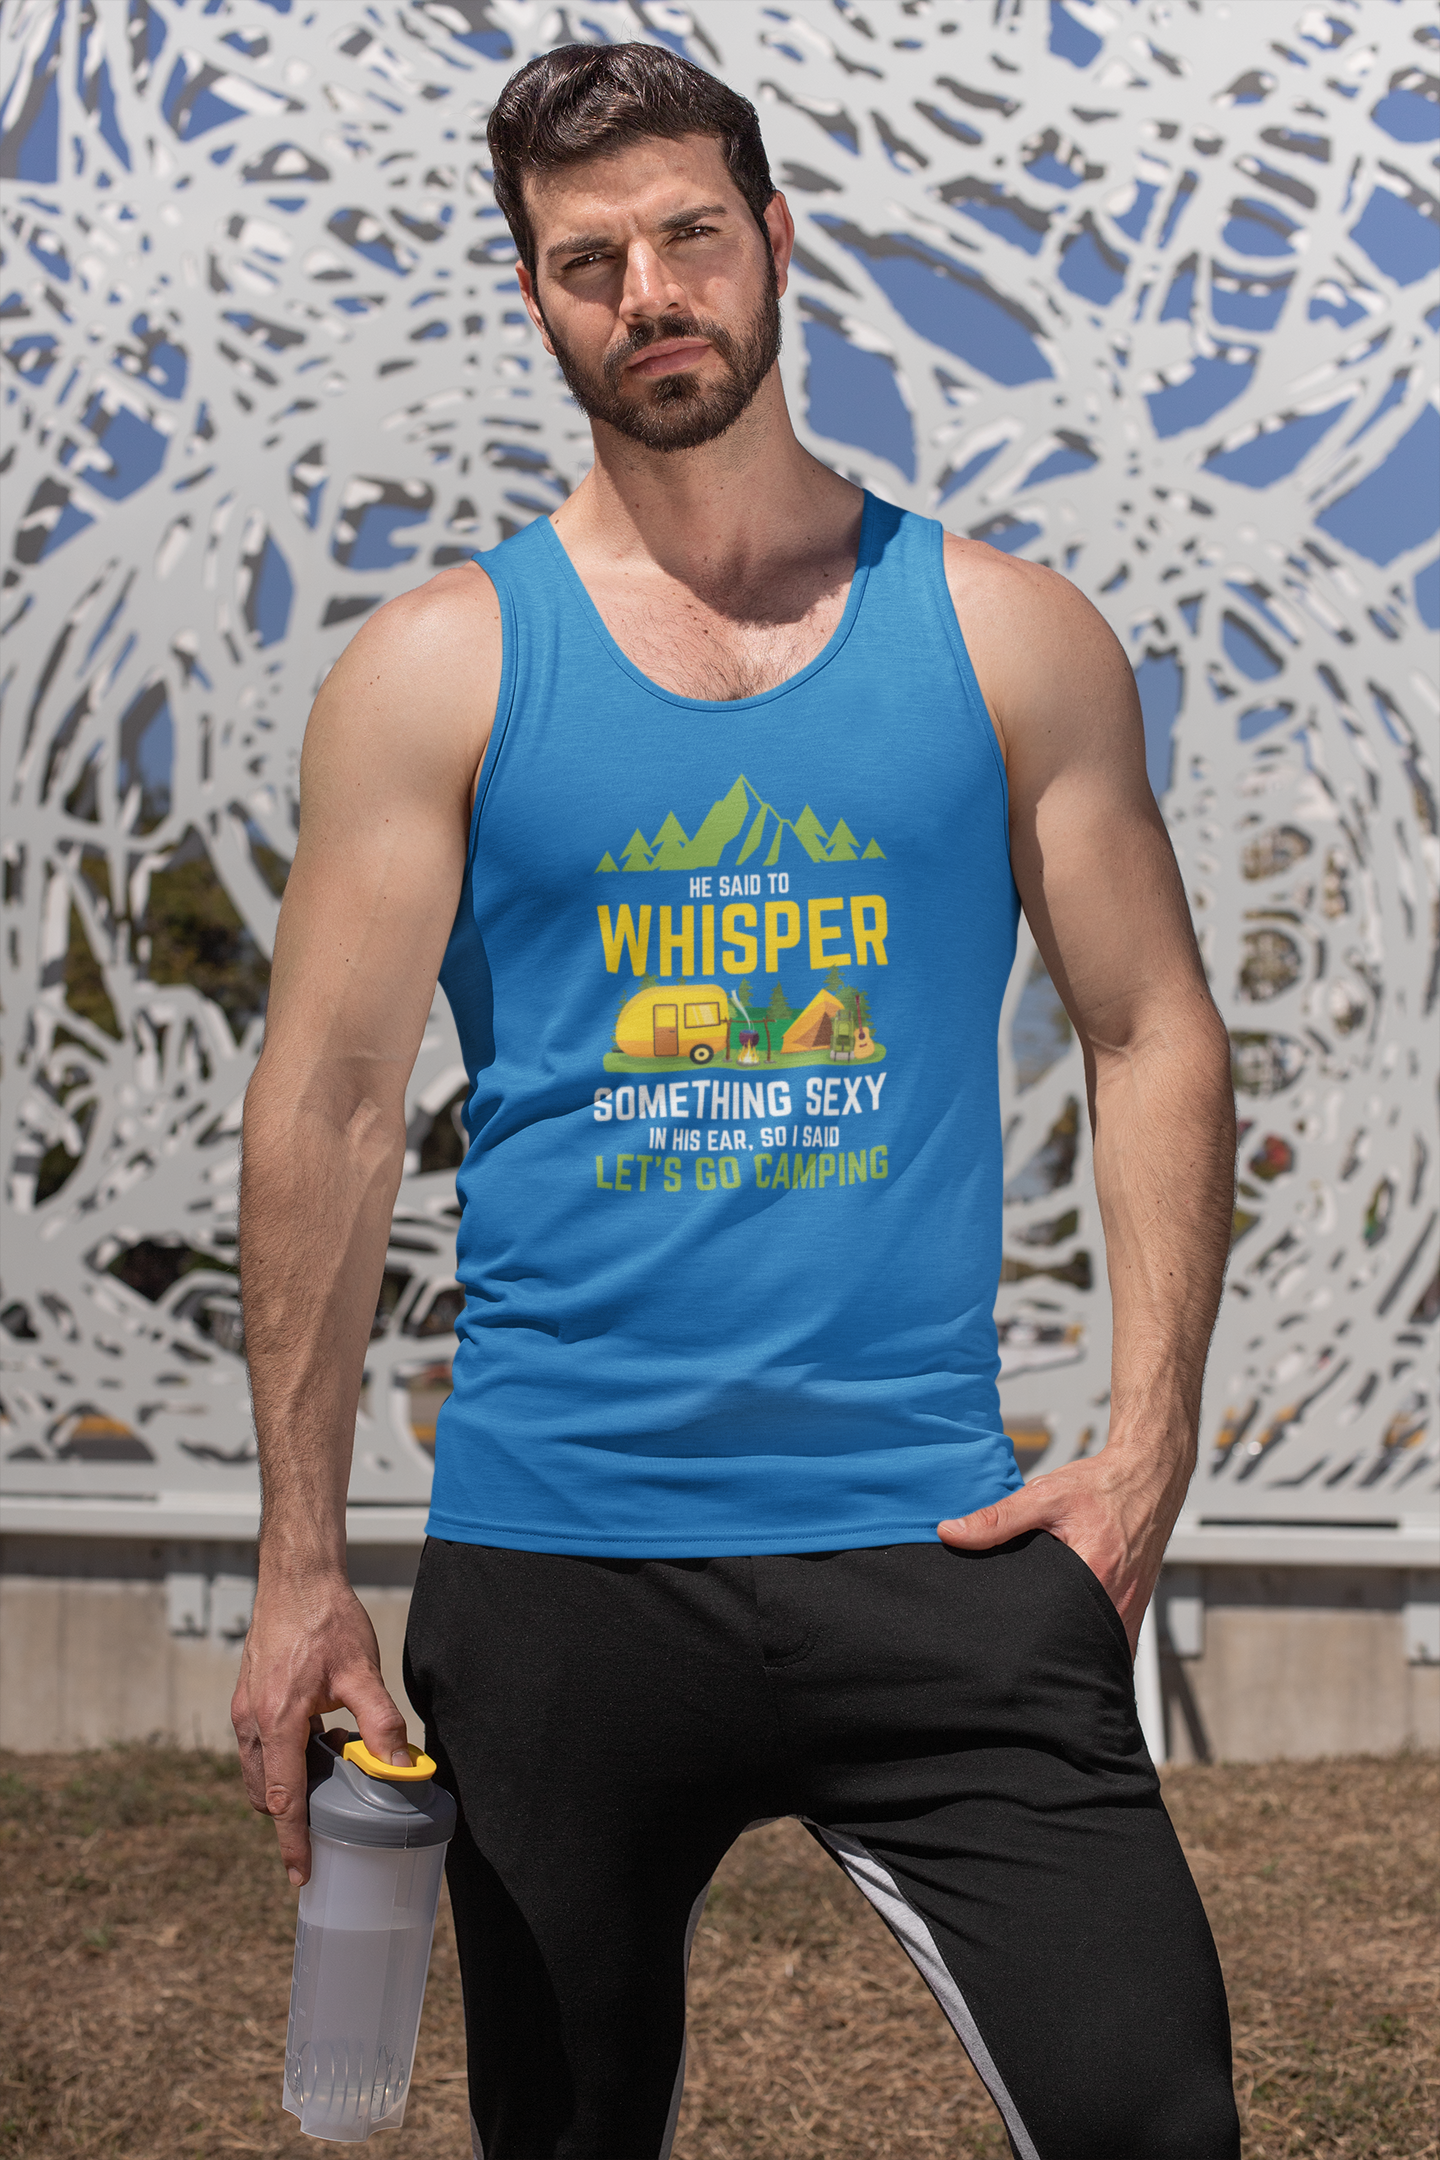 Whisper in his ear; Soft 100% cotton tank top. Removable tag for comfort